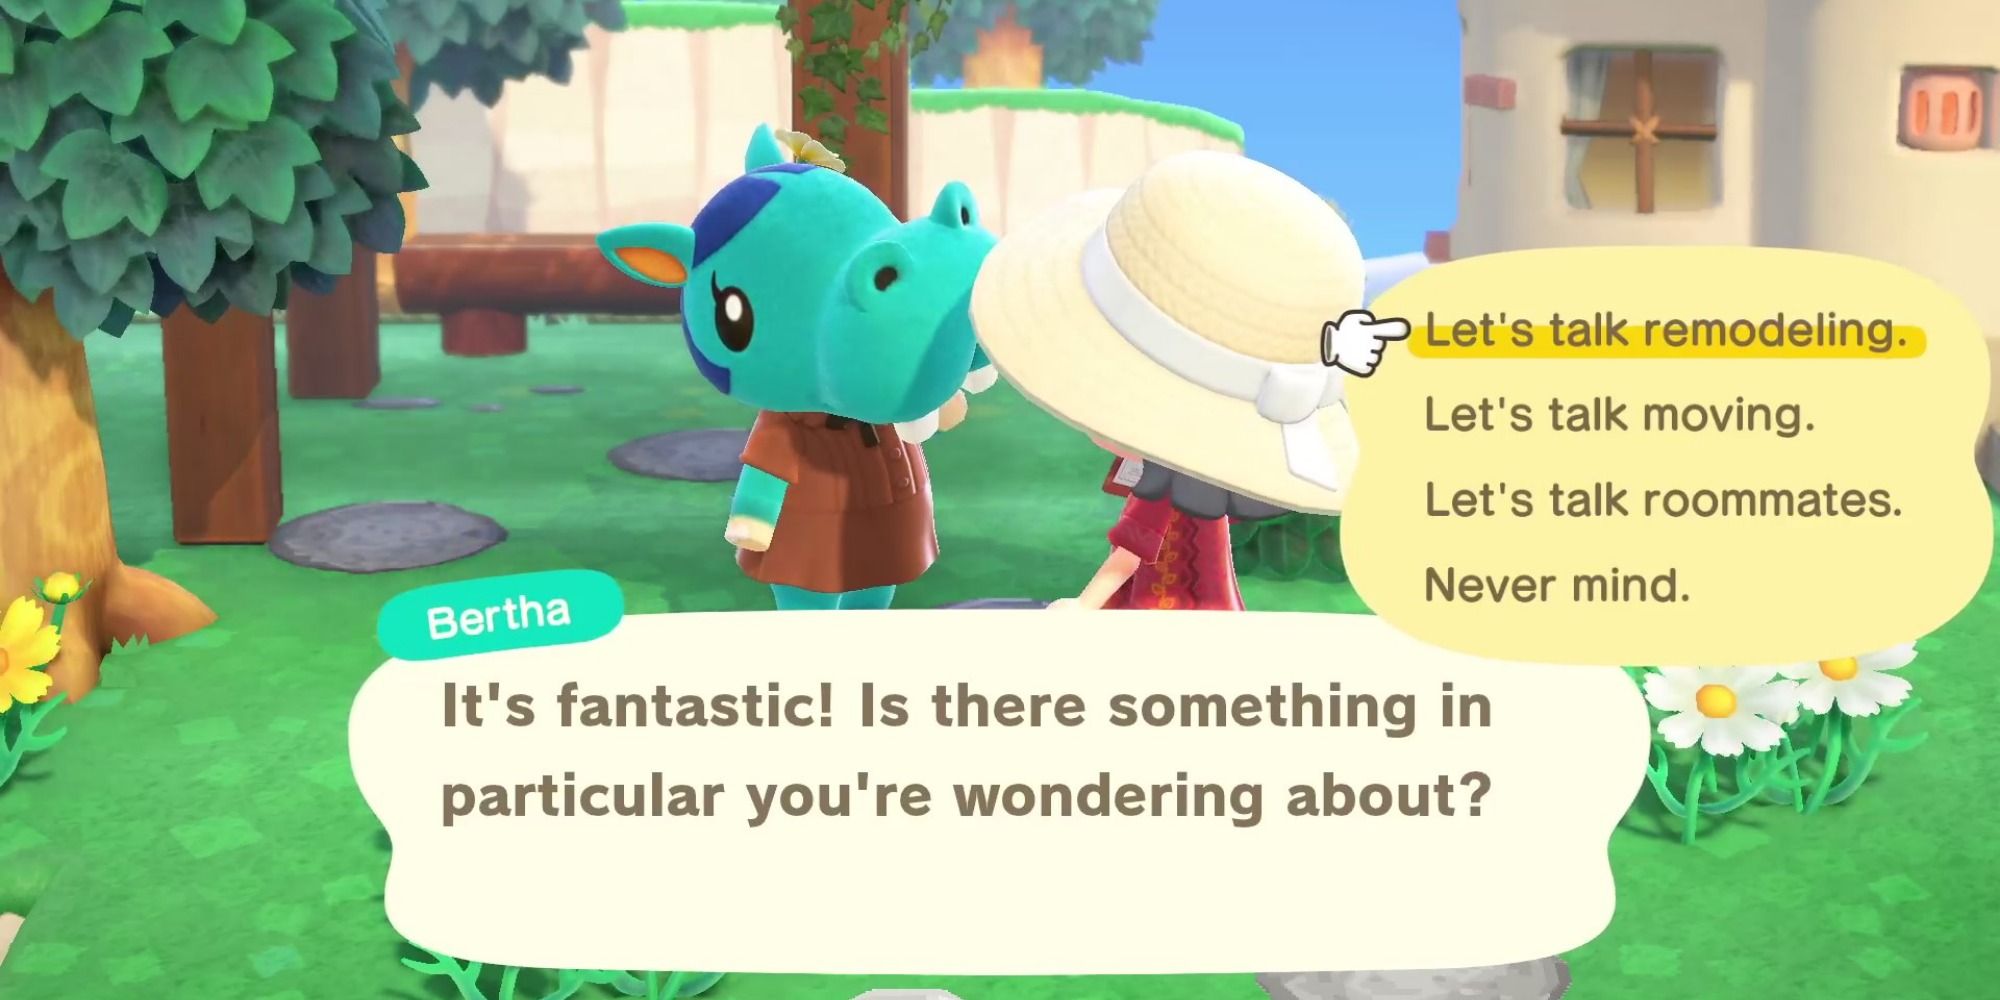 A player asks blue hippo Bertha if she wants to talk about remodeling her house